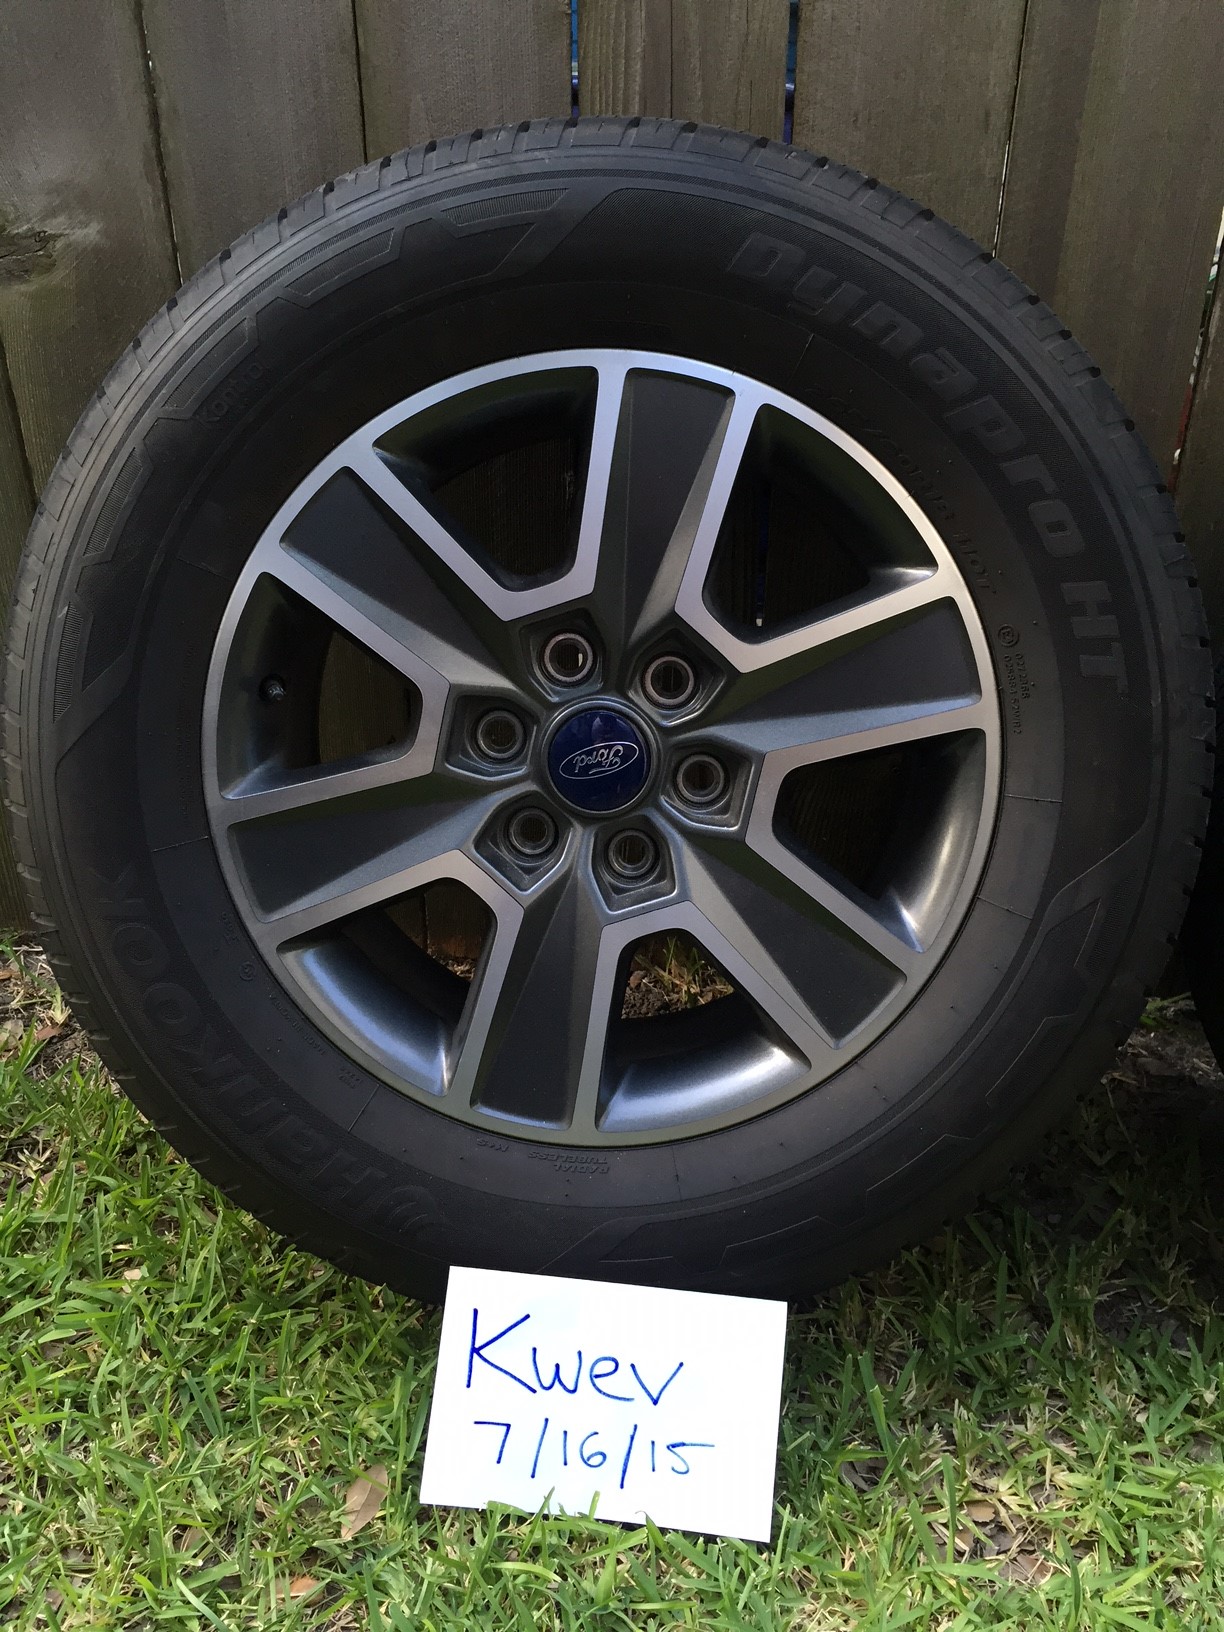 2015 OEM 18" FX4 Wheels and Tires - Ford F150 Forum - Community of Ford